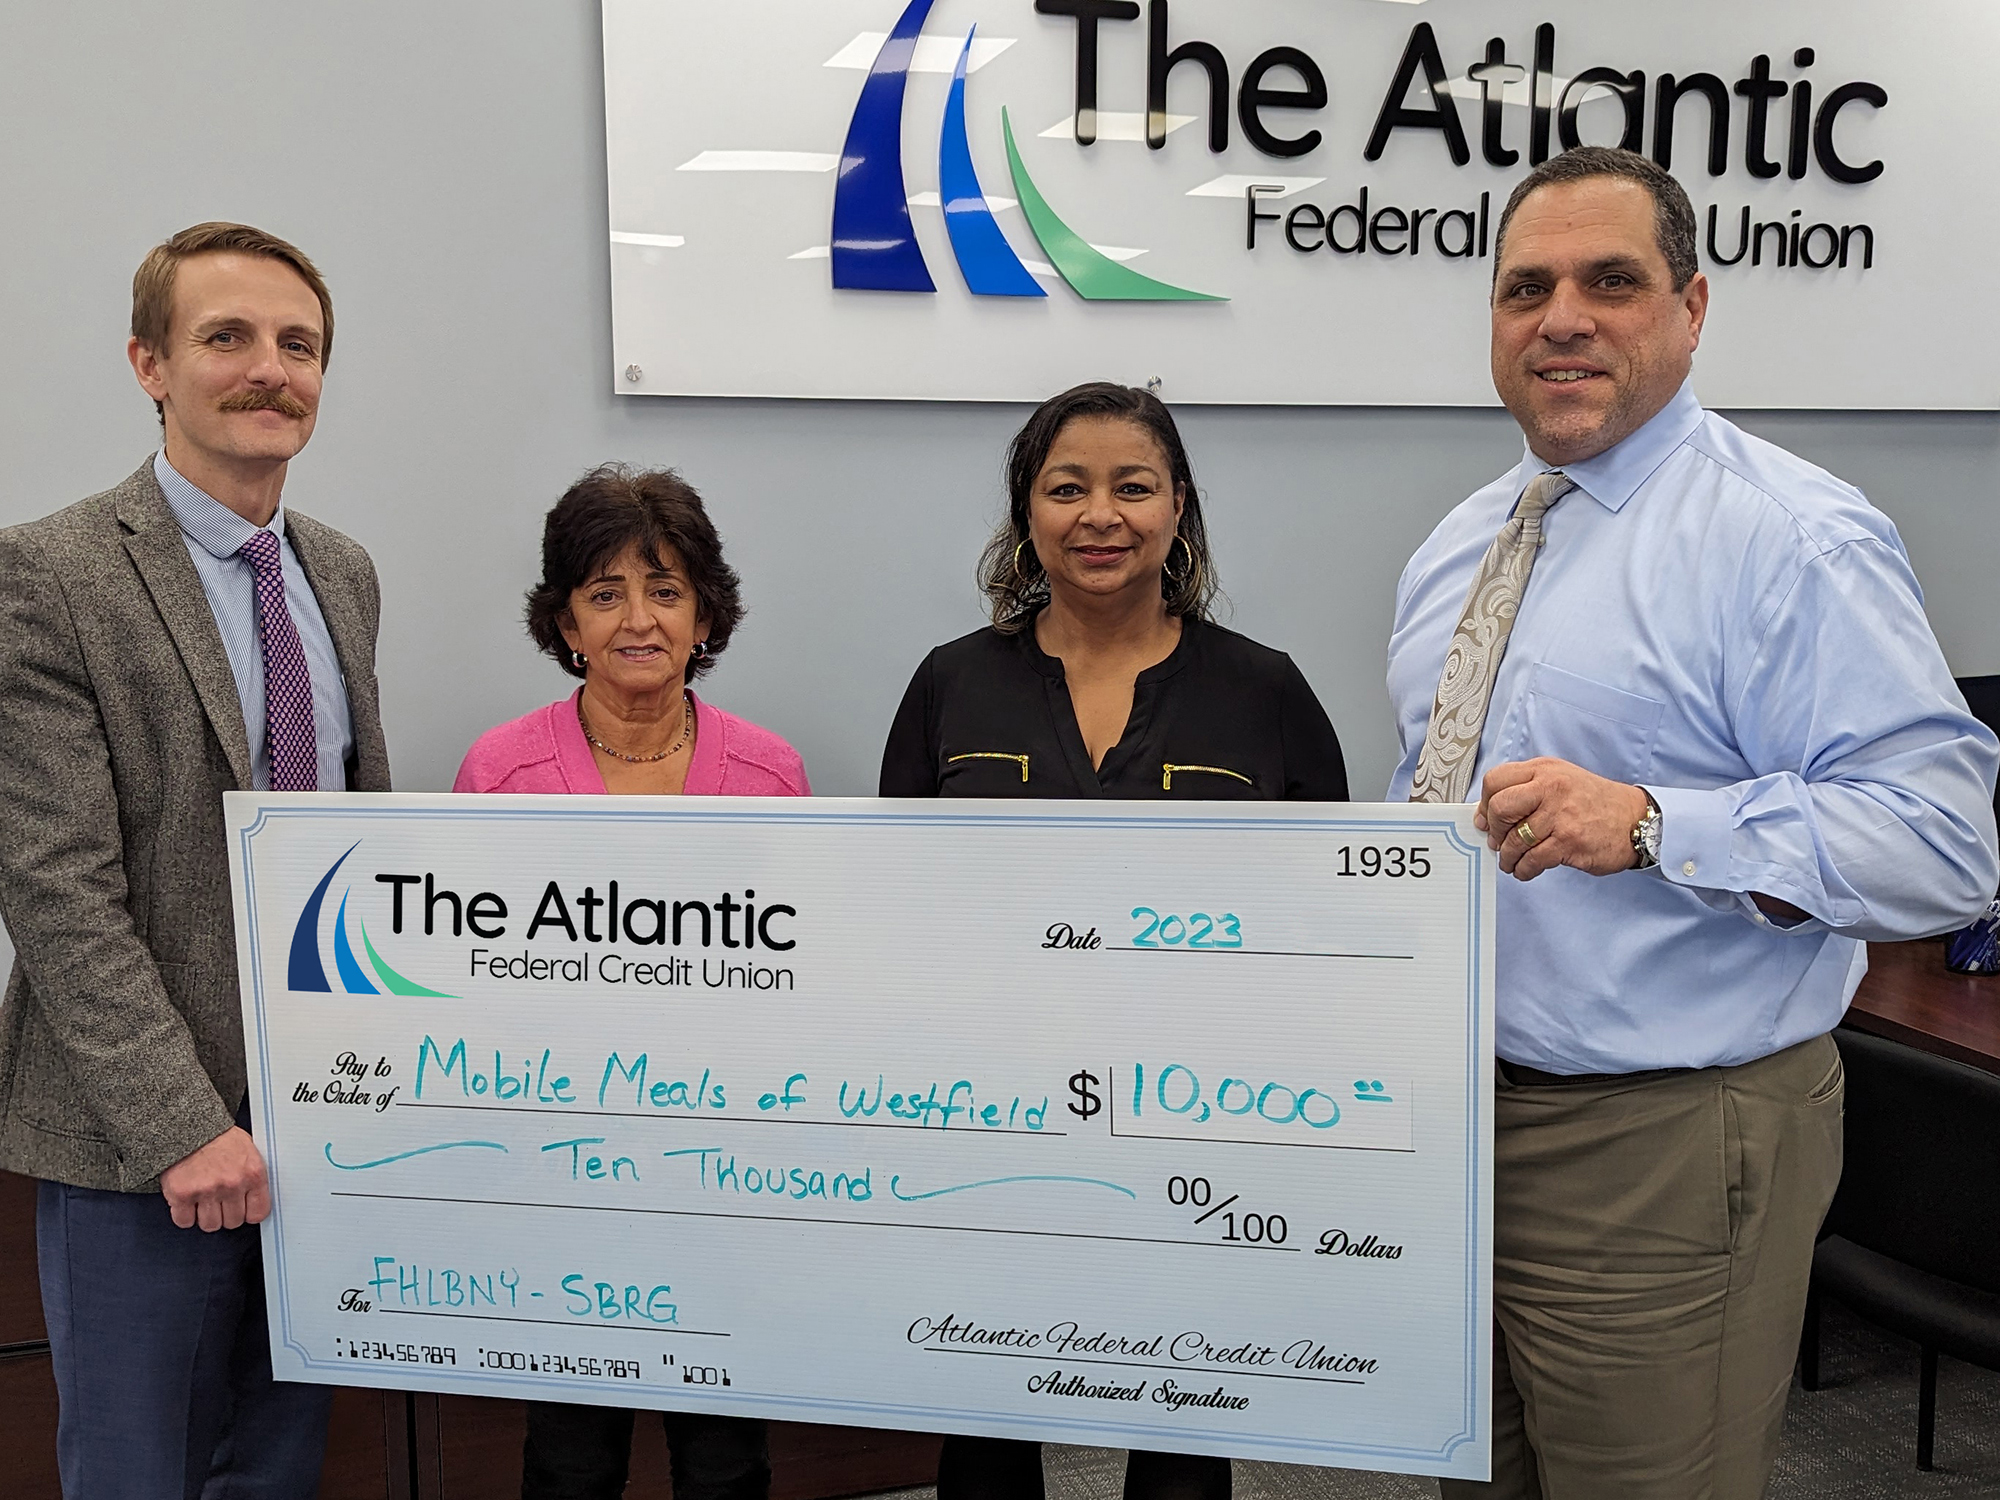 Photo of representatives from Mobile Meals of Westfield accepting an oversized check of $10,000 through the FHLBNY SBRG from representatives of The Atlantic